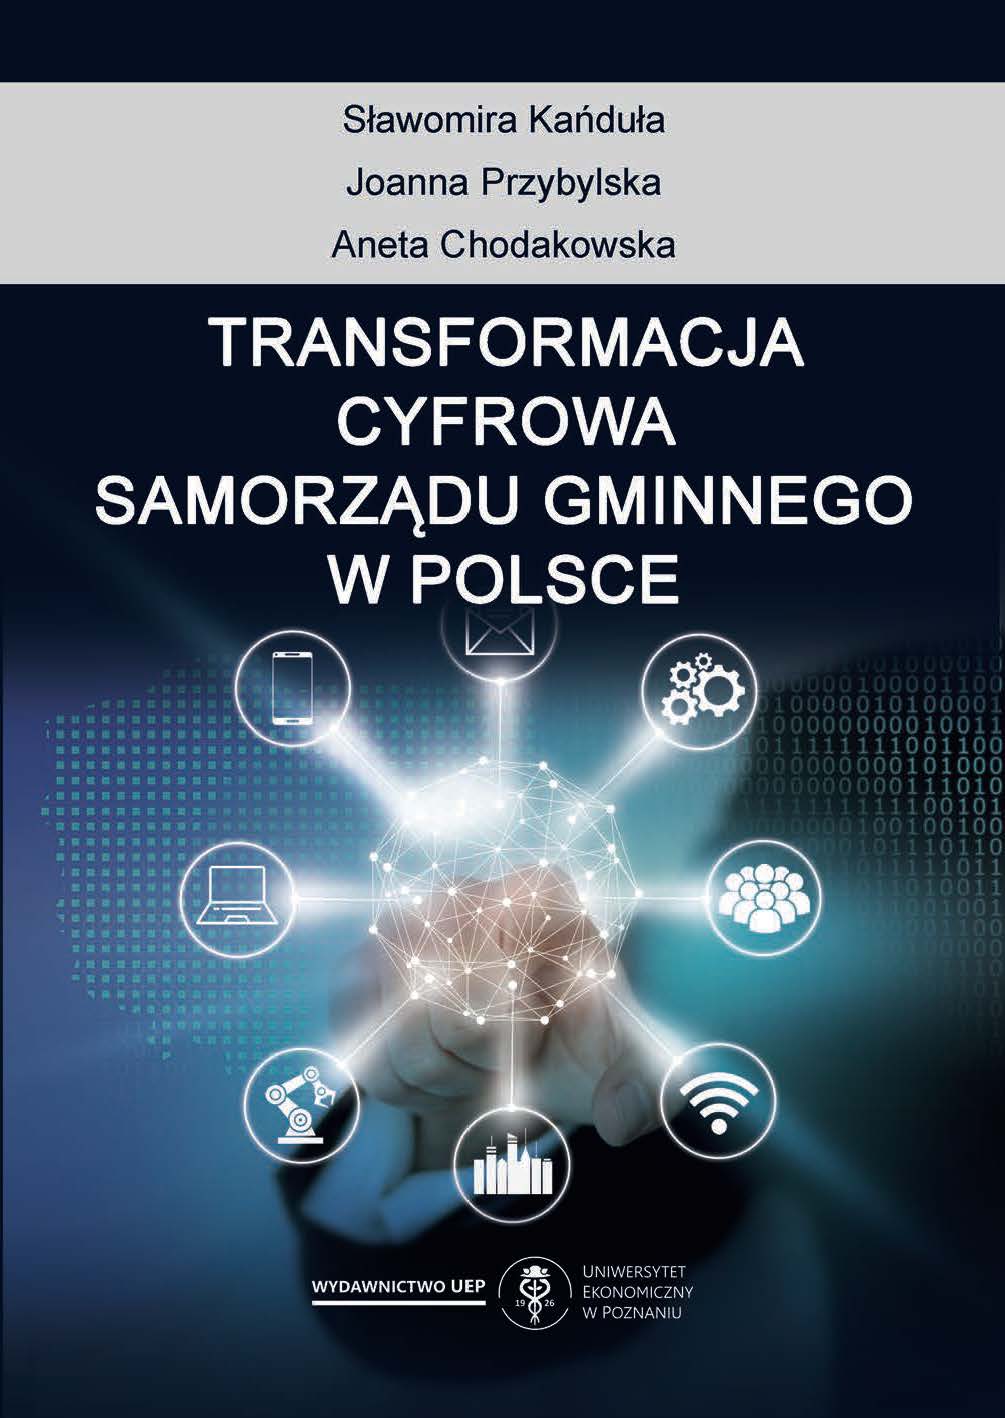 Digital transformation of local government in Poland